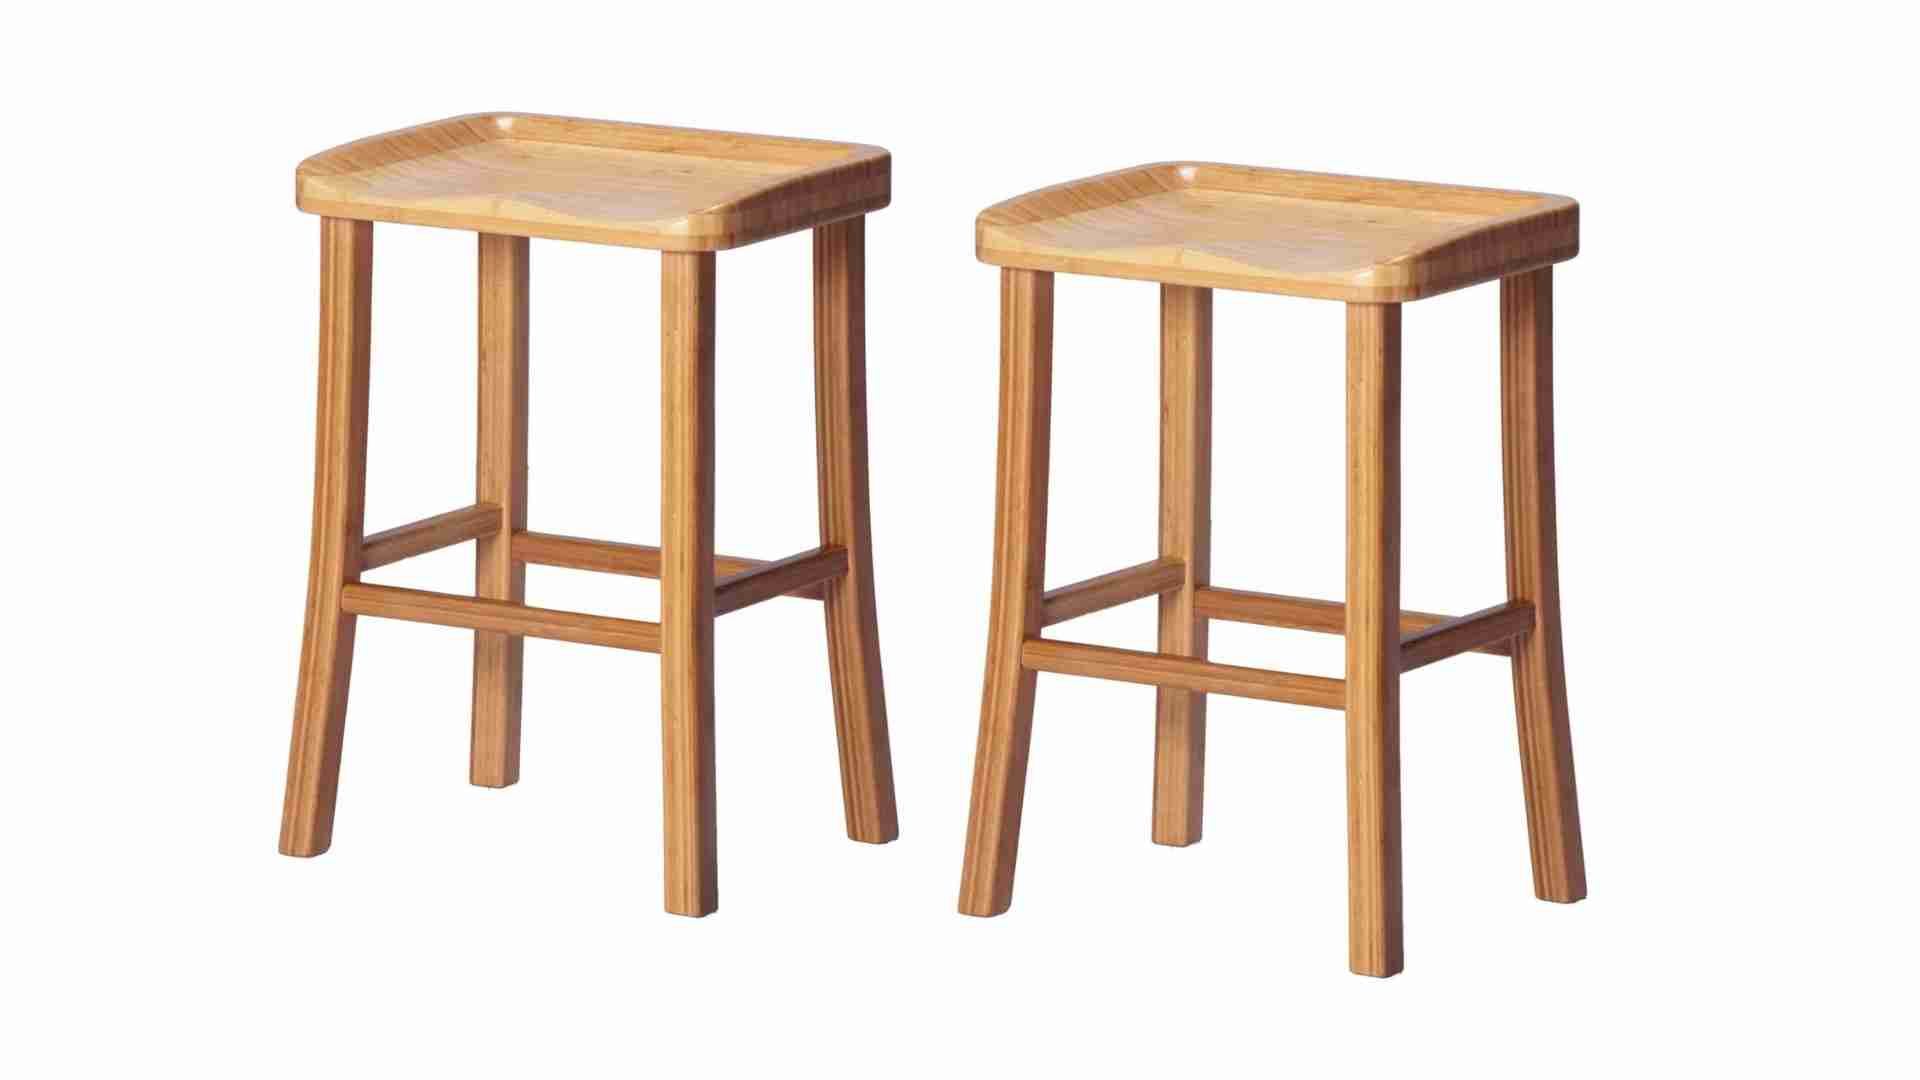 Solid bamboo stools